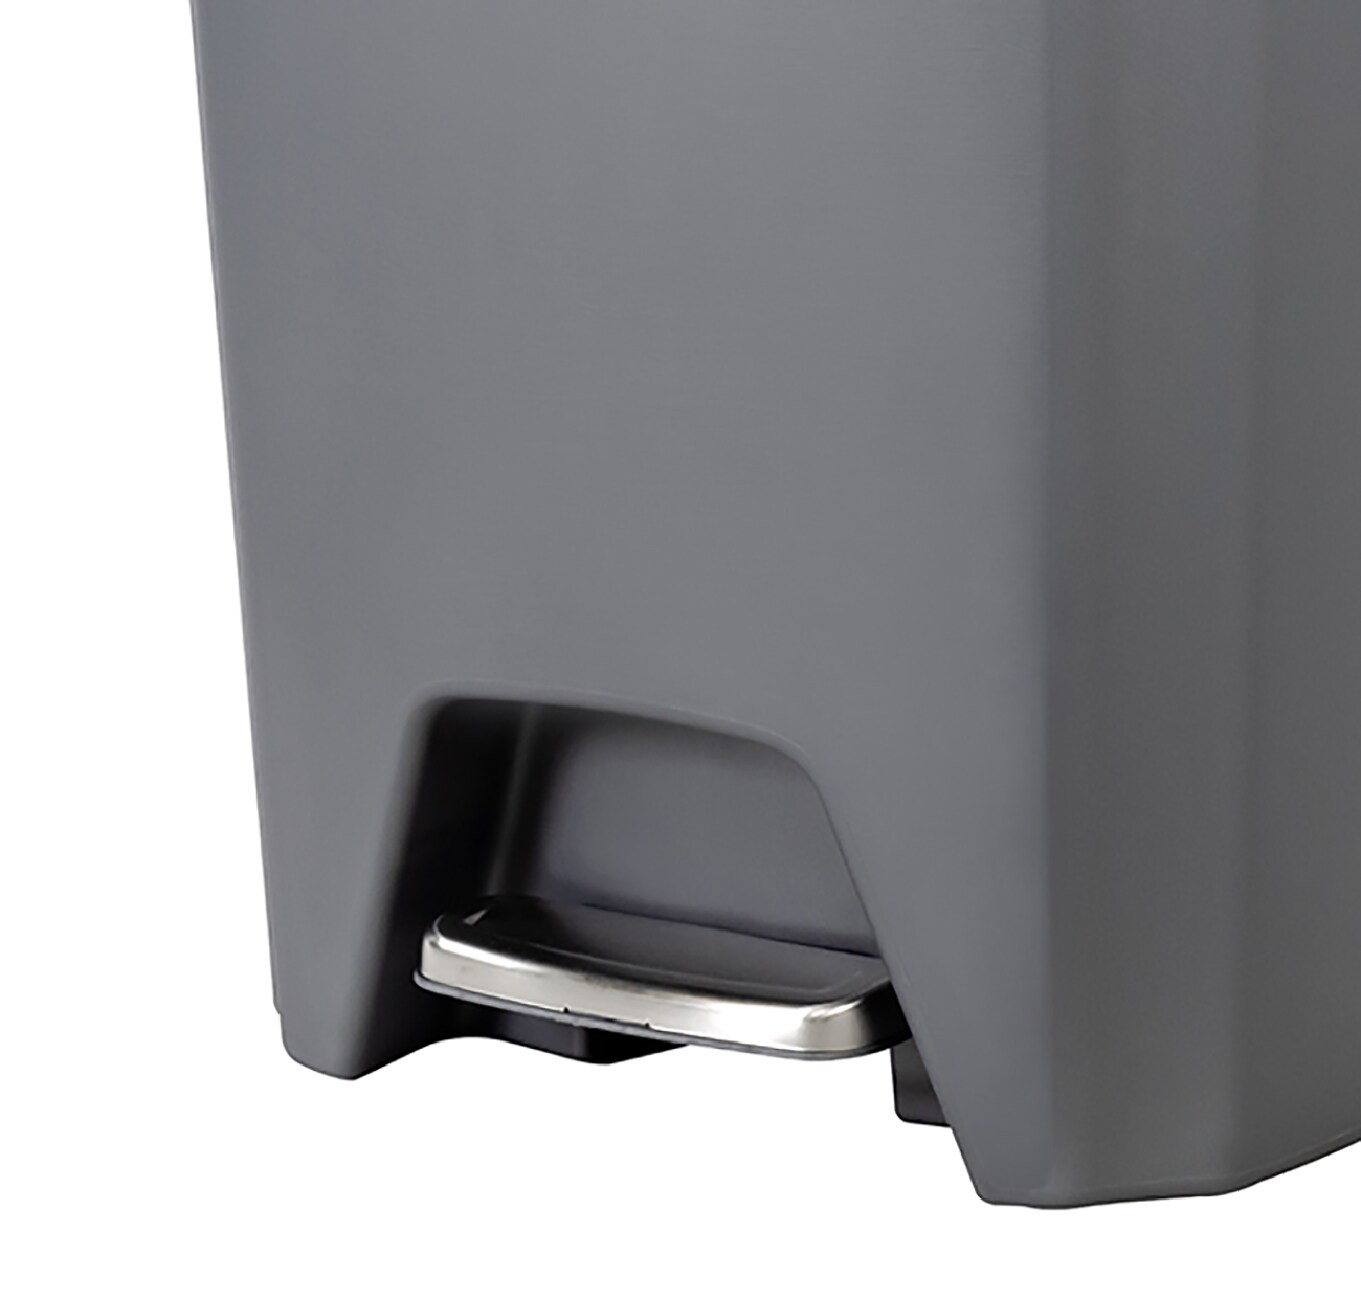 Hefty Step-On Gunmetal 13-Gallon Waste Can with Soft Close Lid